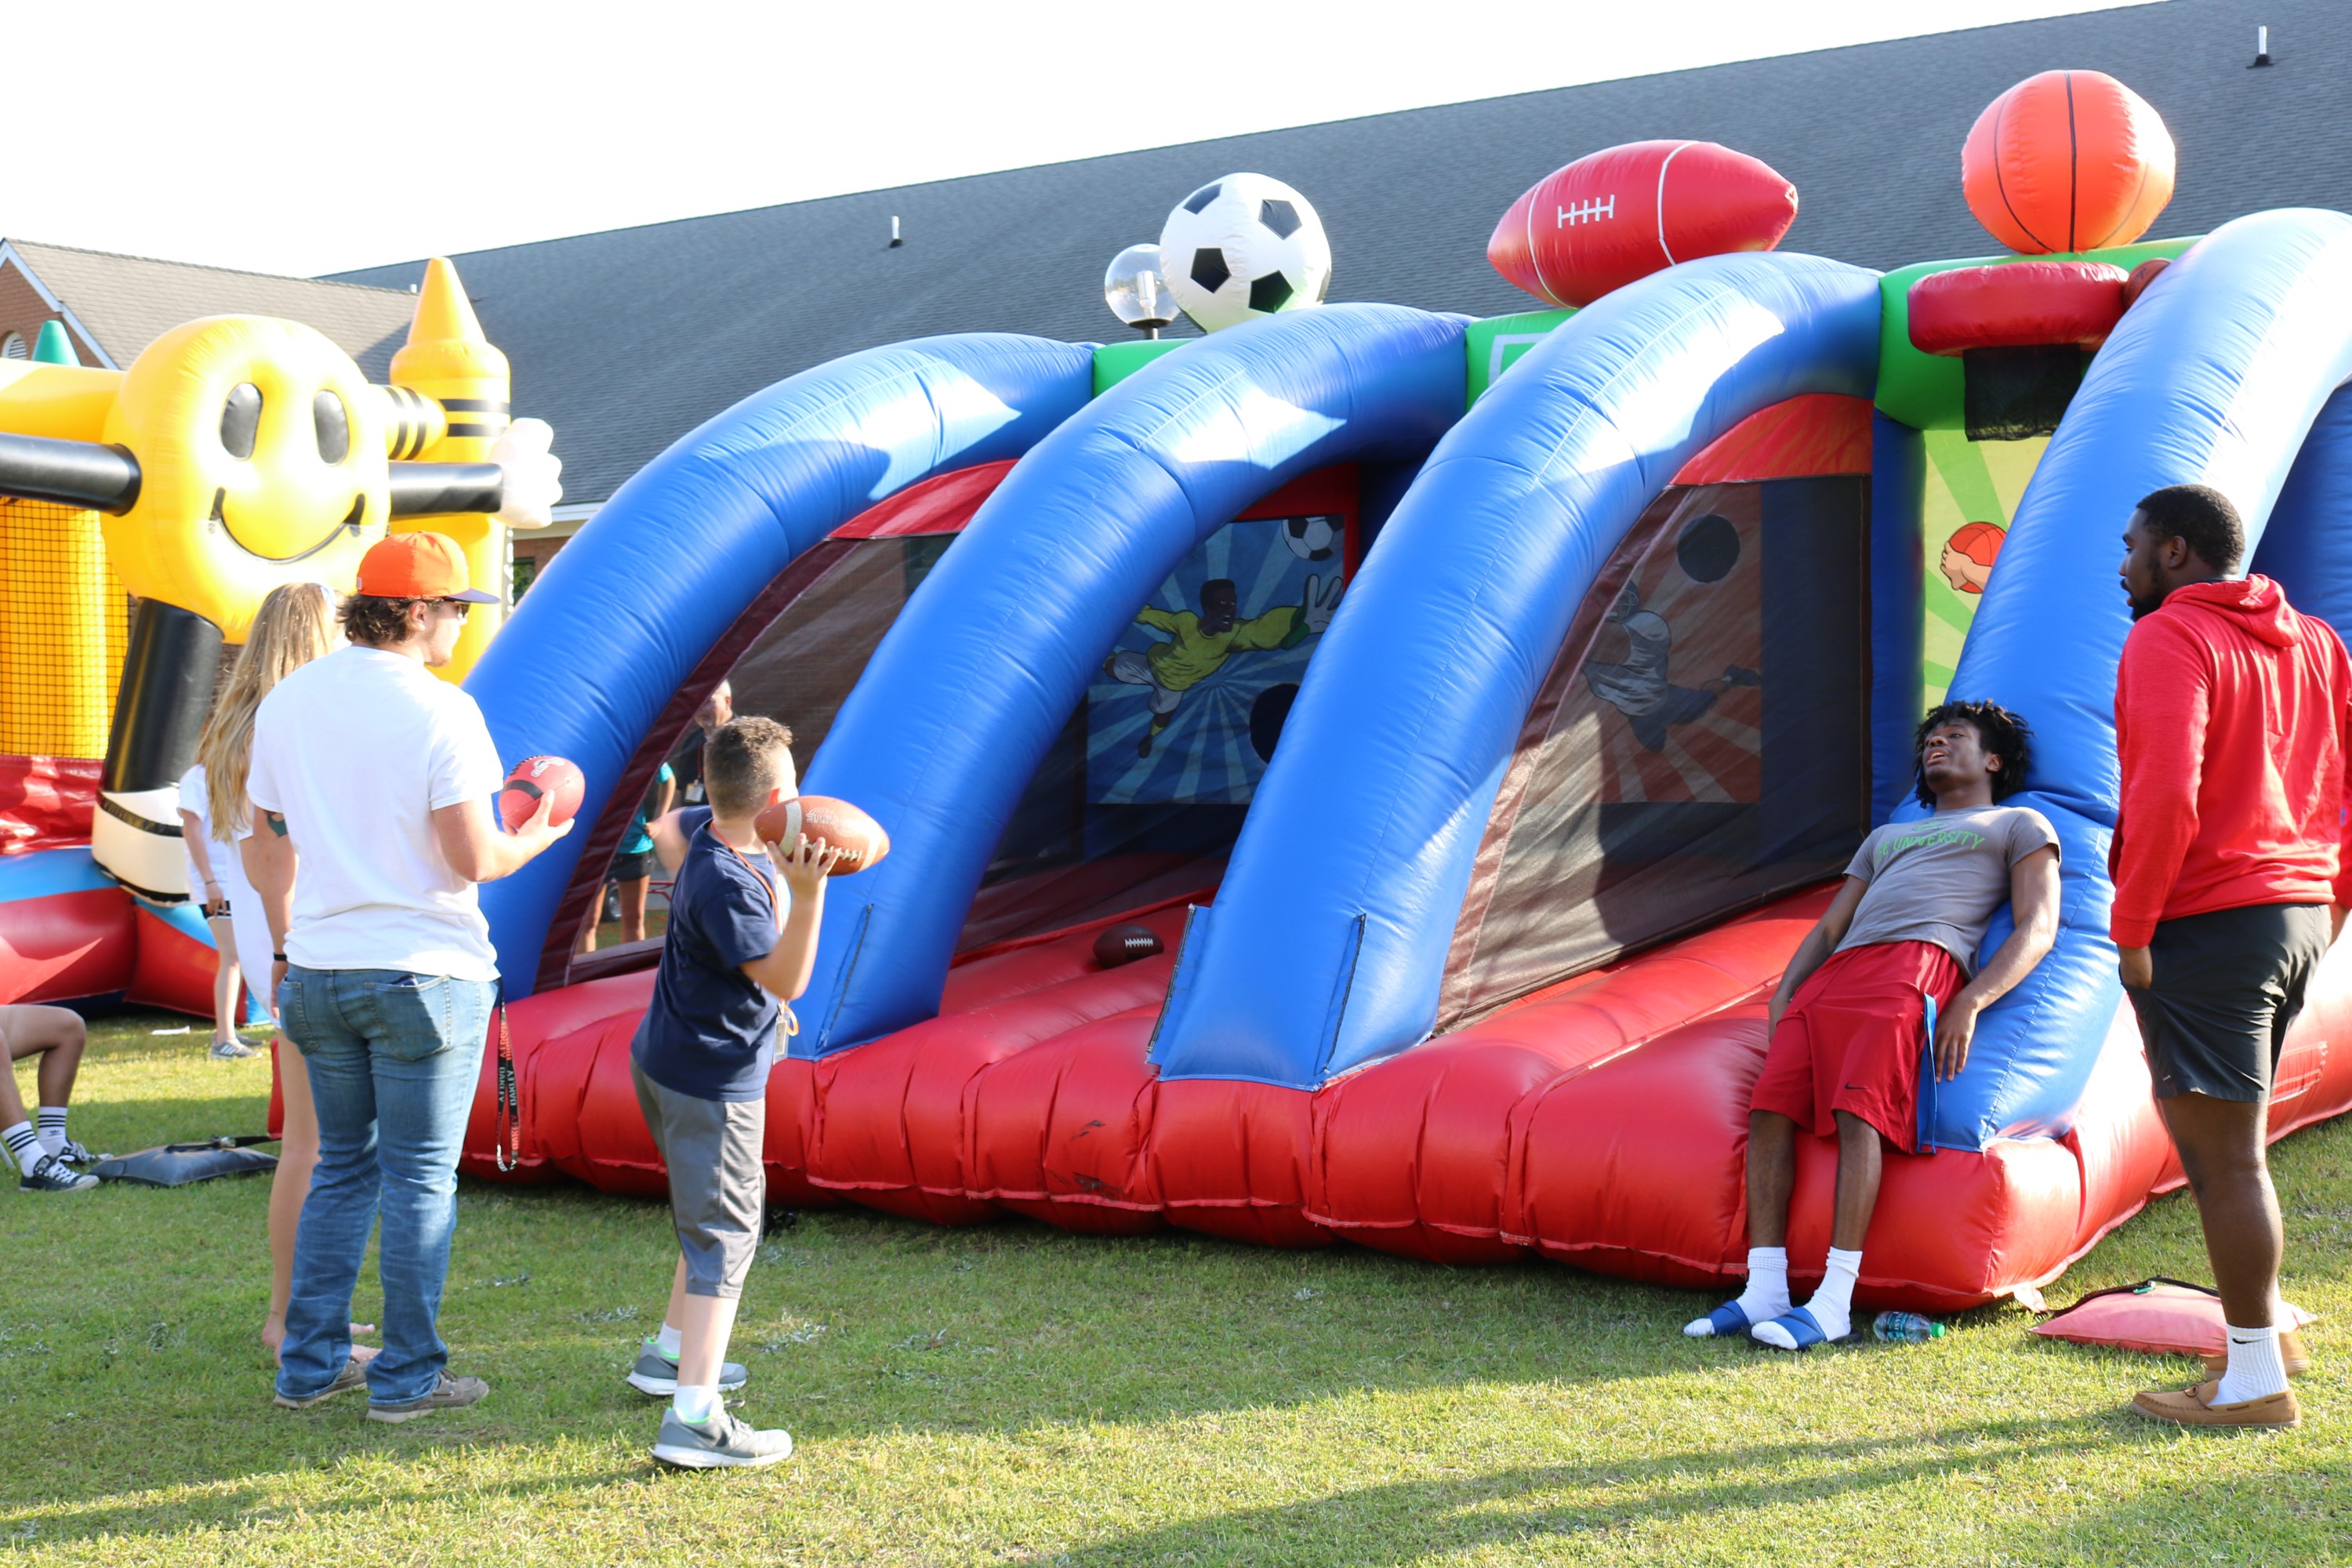 Brewton-Parker students played alongside alumni’s children with inflatables and a mechanical bull at the Family Fun BBQ on April 13. Photo Credit: Caitlyn Parrish